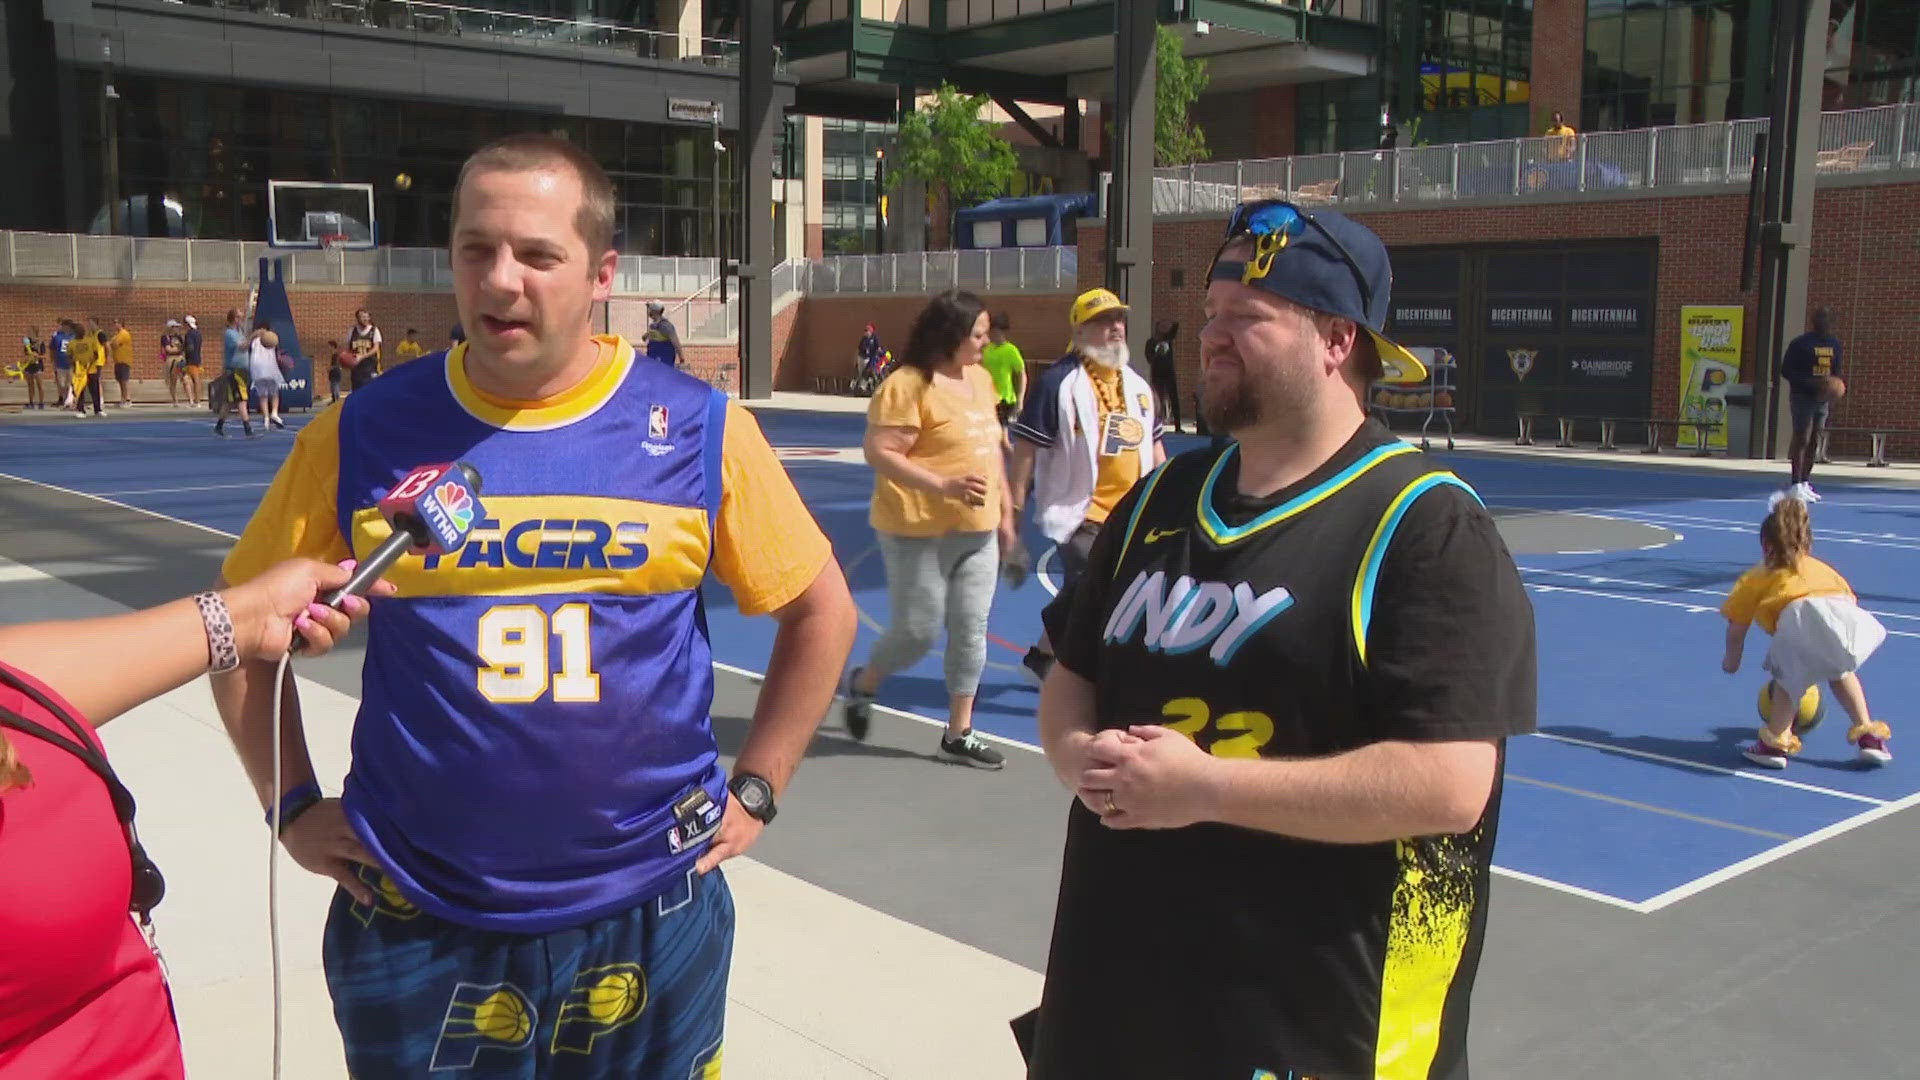 13News reporter Logan Gay talks with Pacers fans ahead of Game 4 of their first-round NBA playoff game against the Milwaukee Bucks.